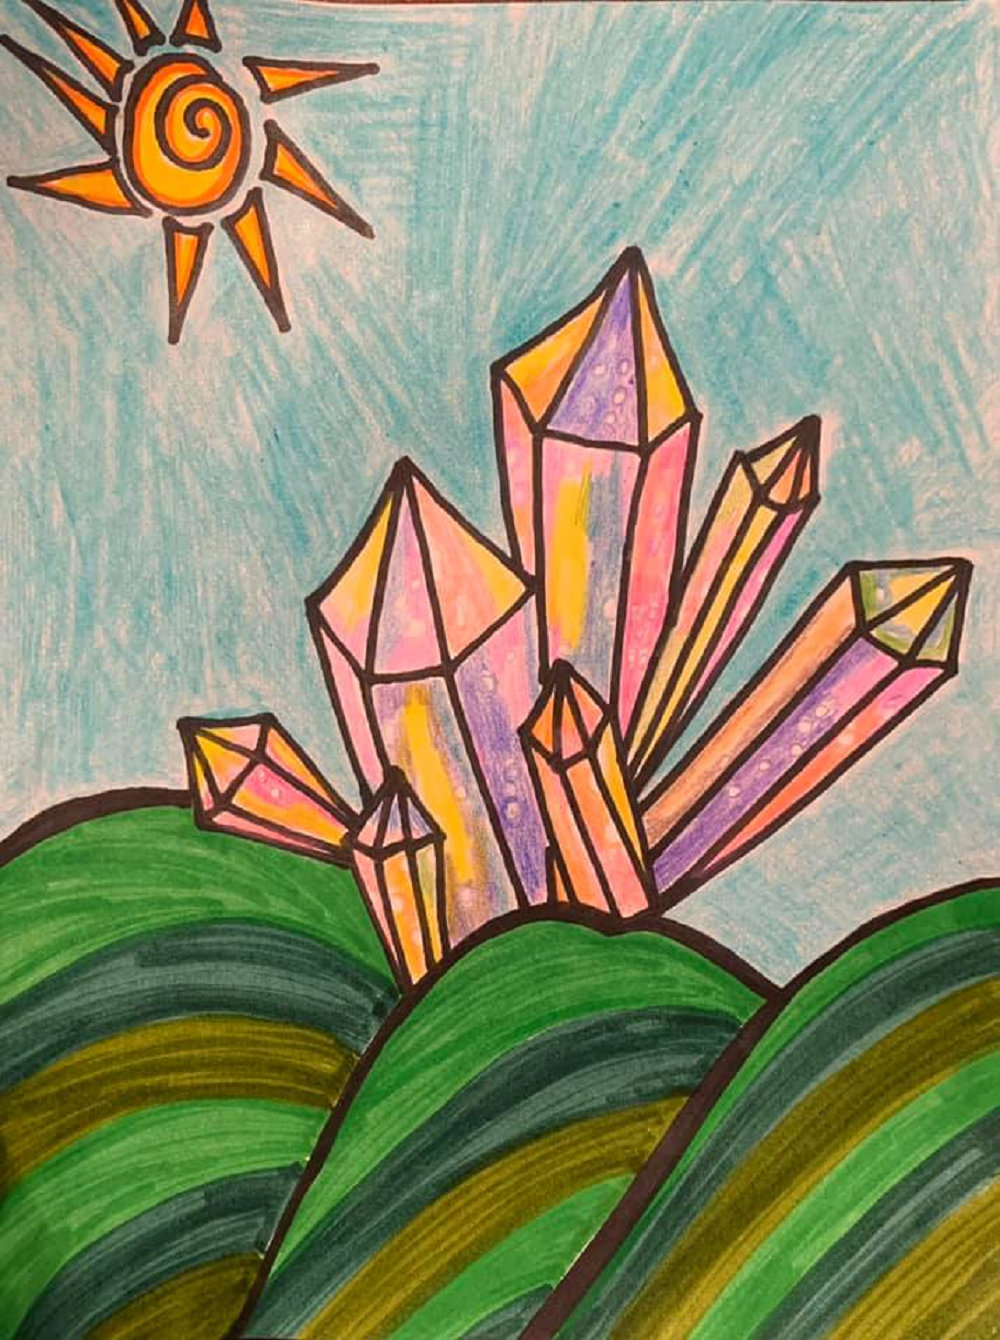 Nina Velazquez got a bit experimental with one of her drawings when she added some crystals to a landscape. She posted it on Facebook so that families and children staying home during the pandemic could draw their own versions of it.